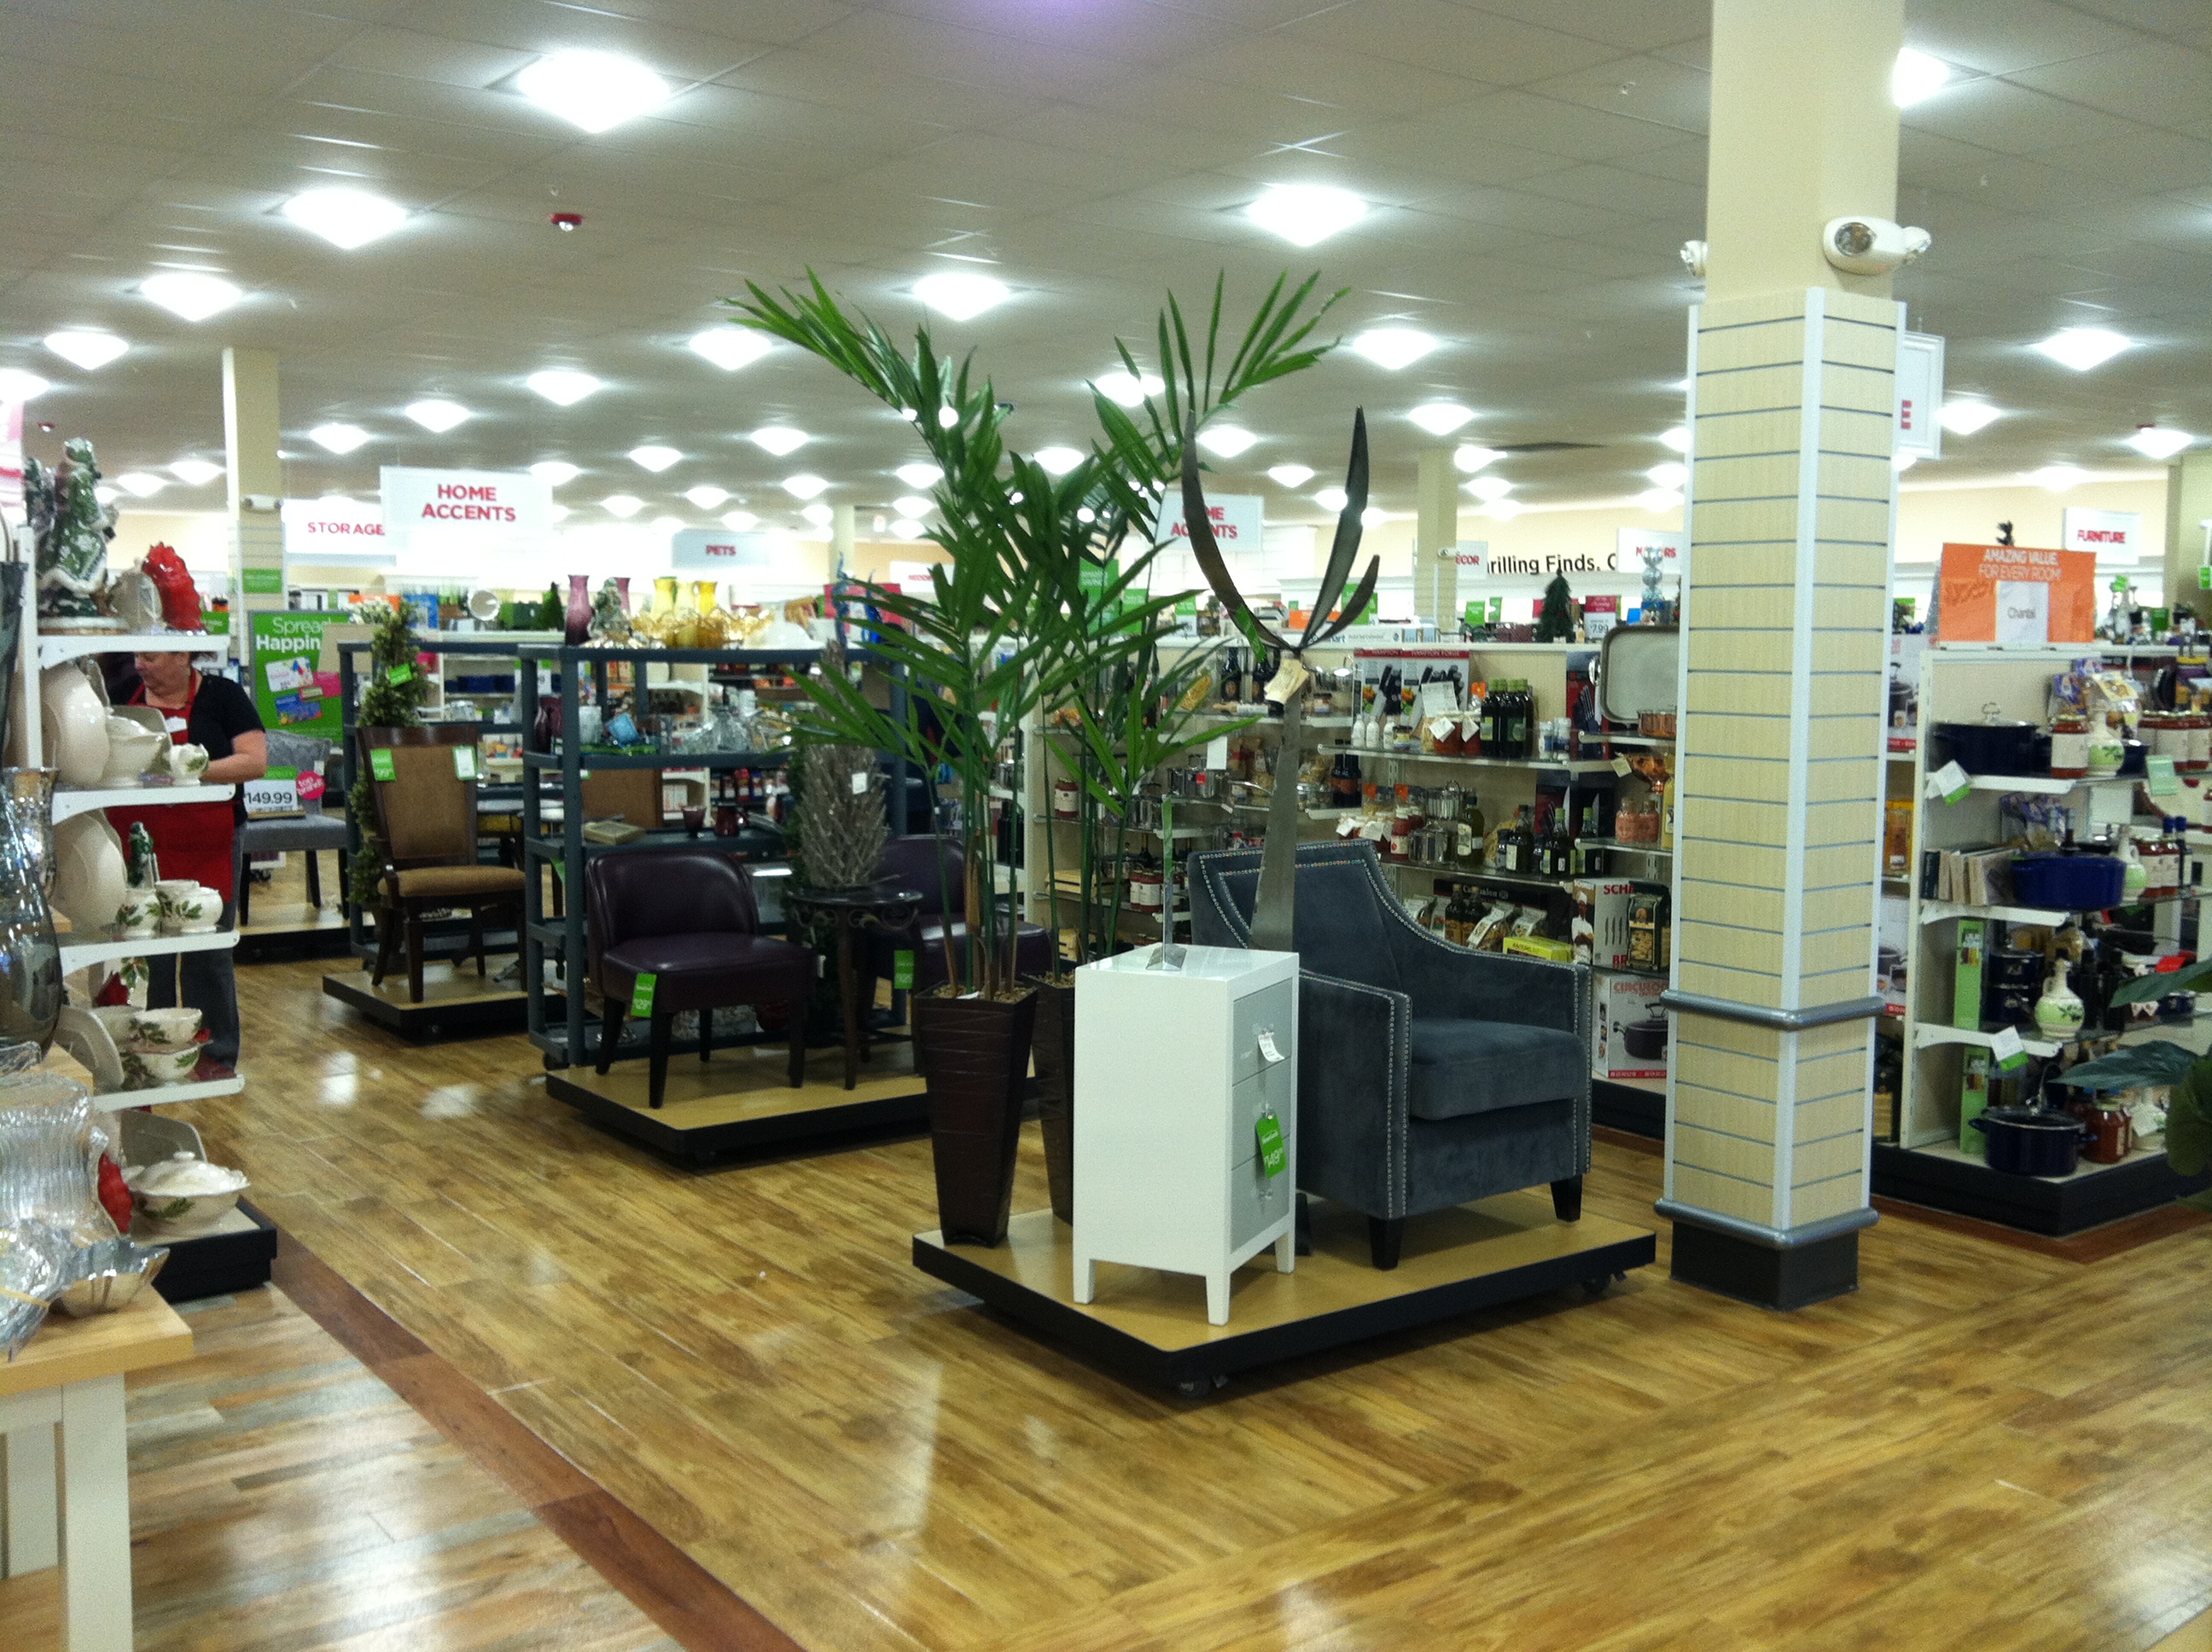 Home Gooda 28 Images Home Goods Furniture Store Stock Home